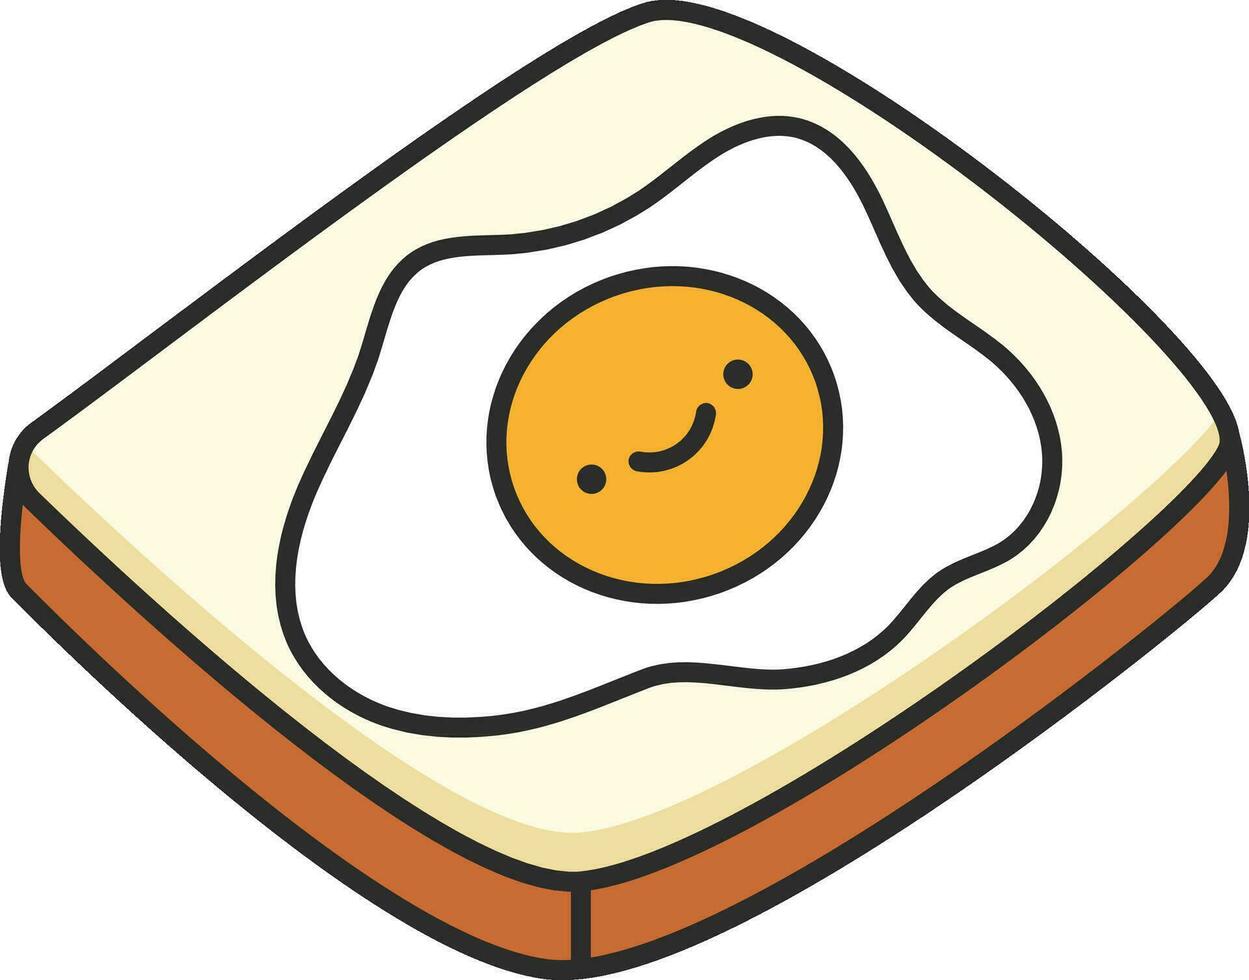 Fried egg on toast. Vector illustration in thin line style.